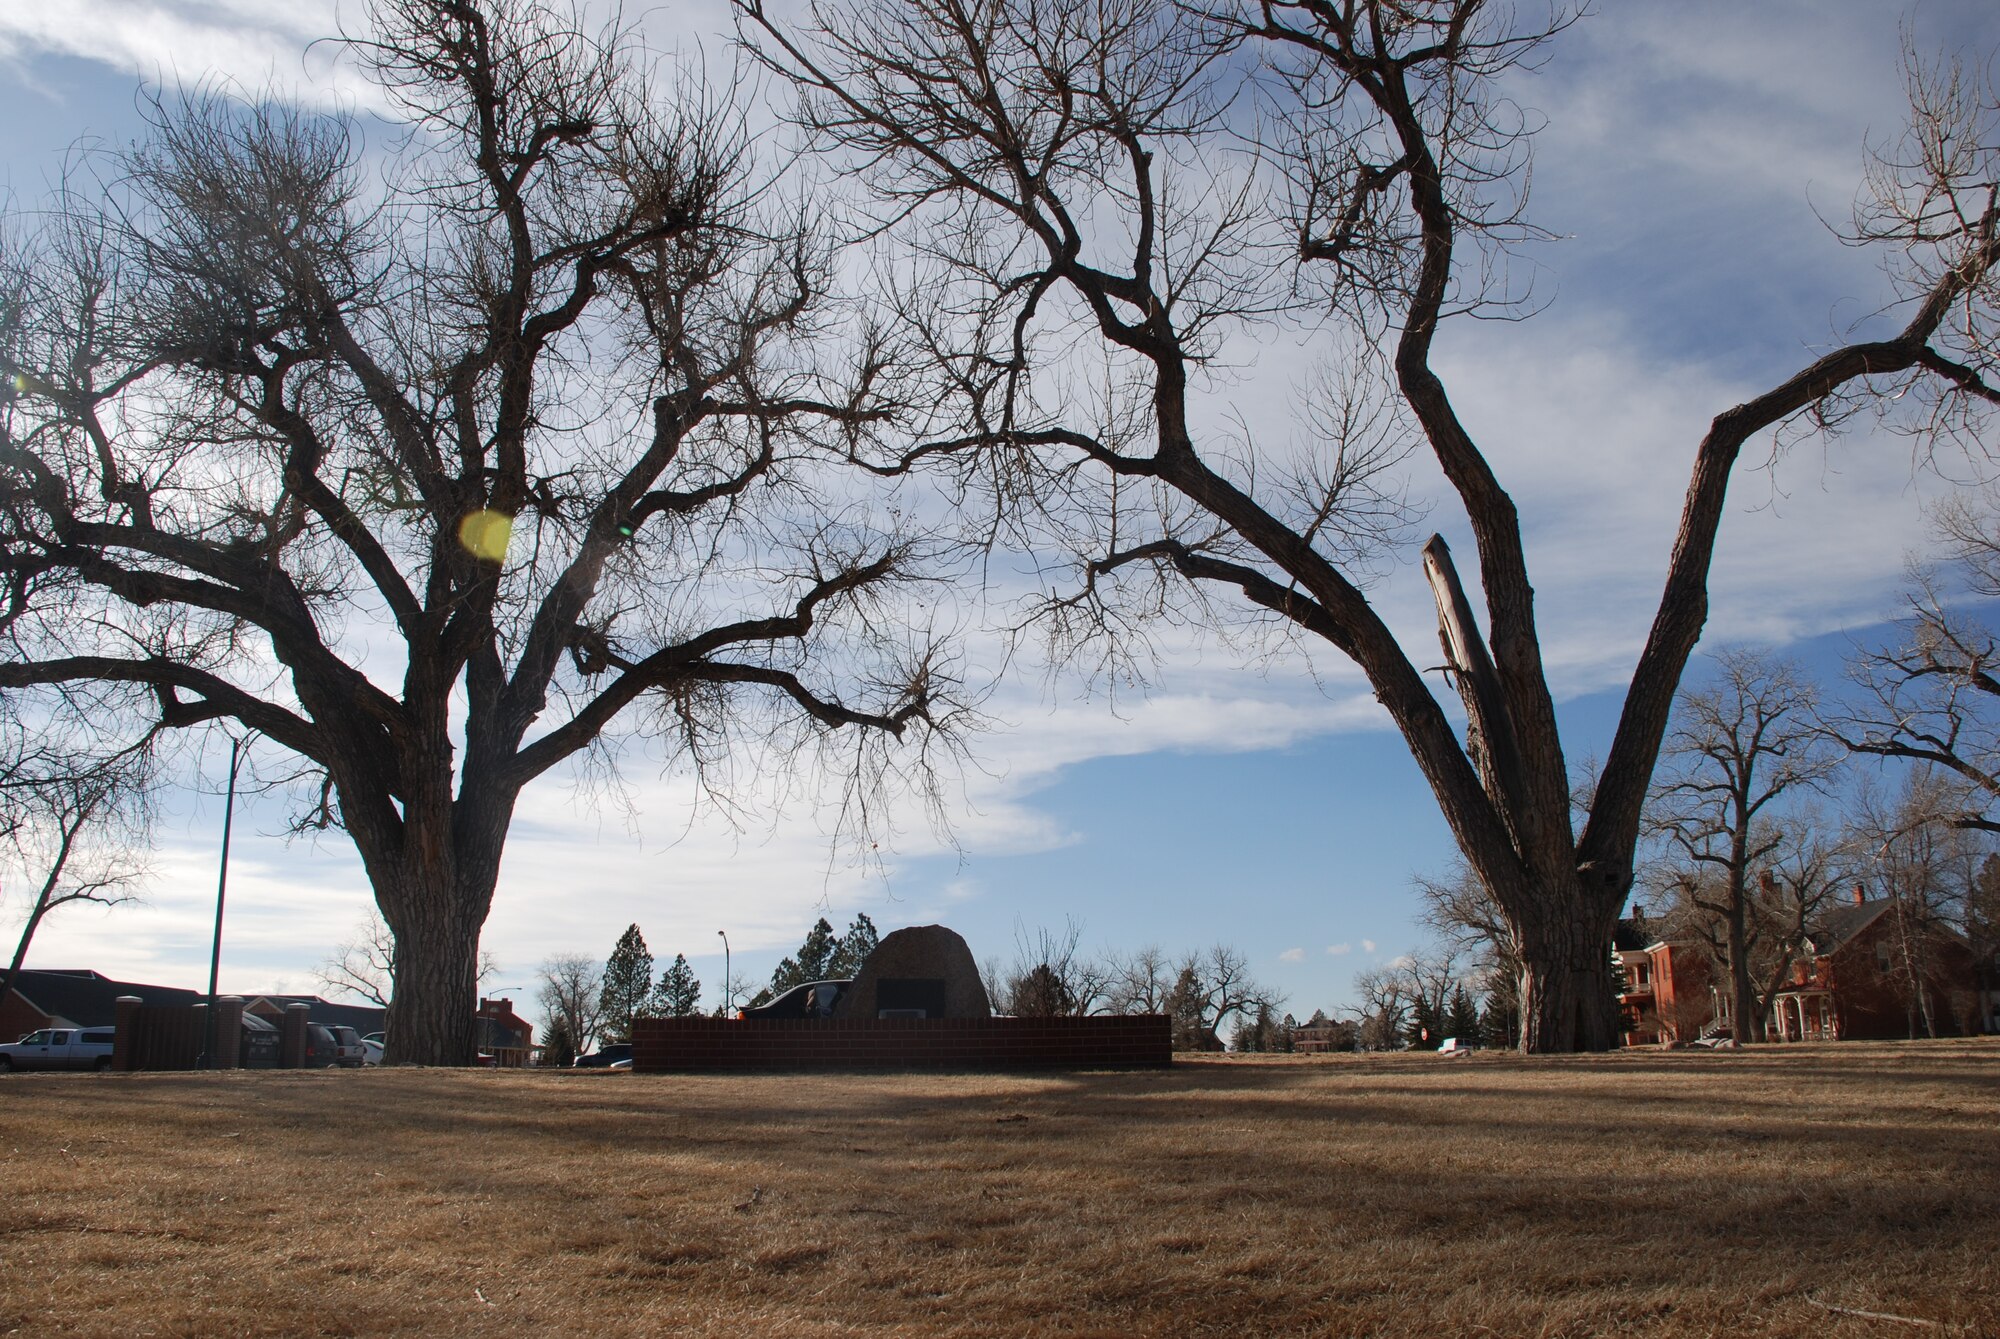 This historic landmark with the two cottonwood trees west of the Warren High plains Chapel symbolizes the original entrance into Fort D.A. Russell, which later became F.E. Warren Air Force Base. (U.S. Air Force photo/Senior Airman Daryl Knee)